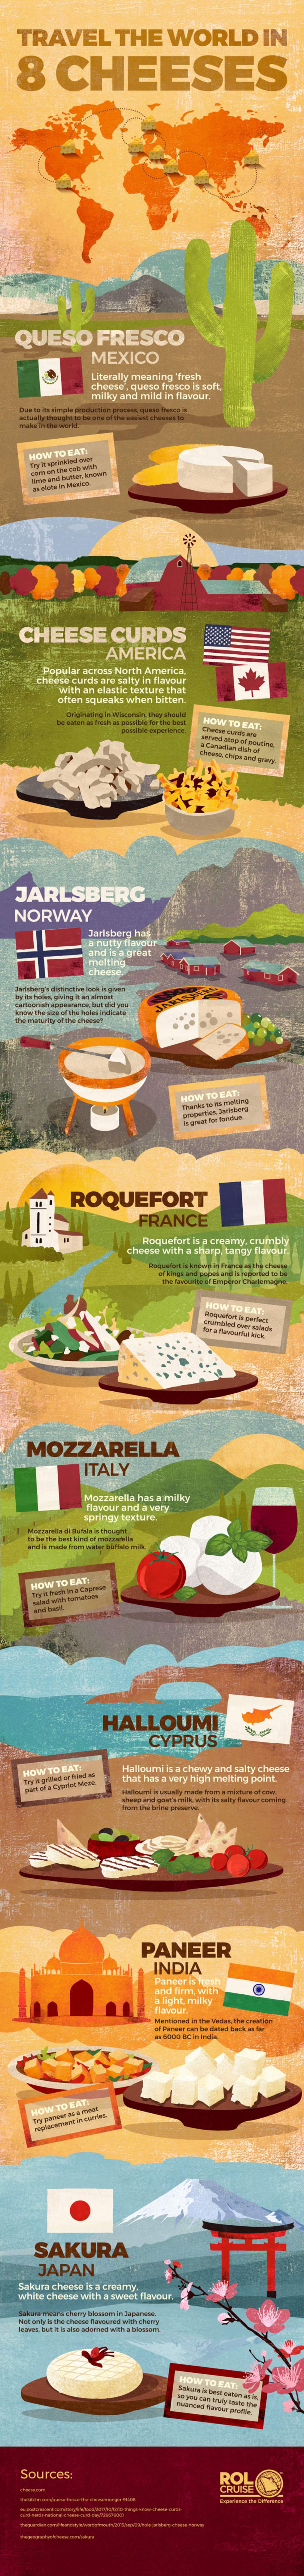 Travel the world in 8 cheeses